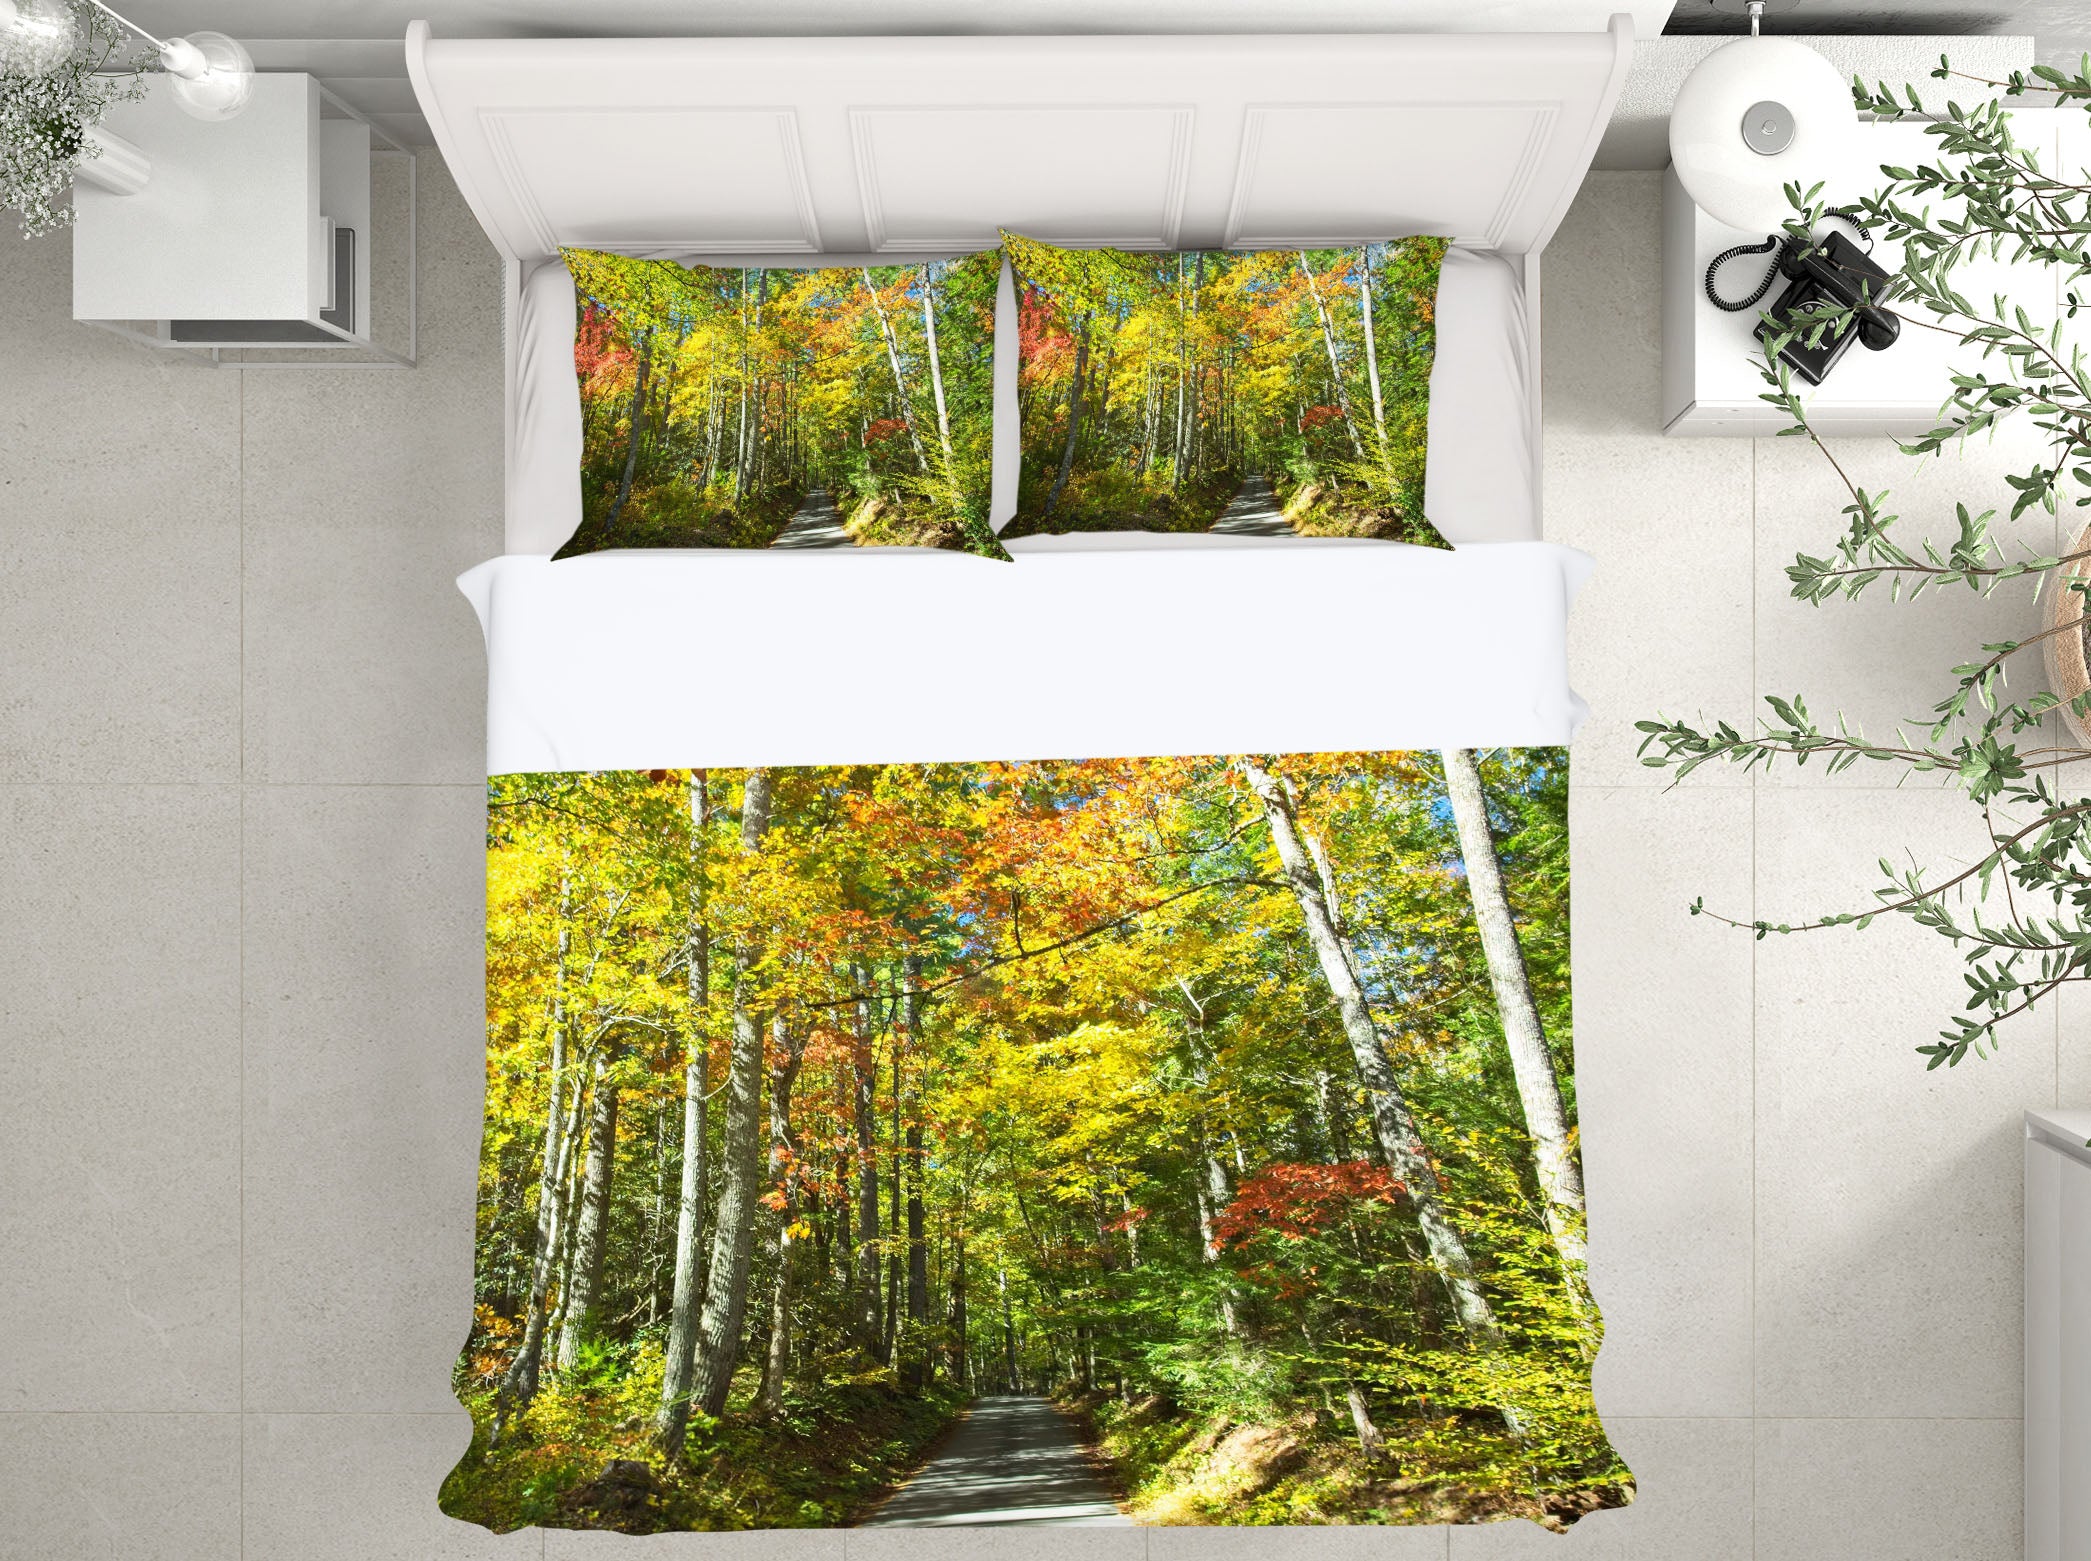 3D Forest Path 2119 Kathy Barefield Bedding Bed Pillowcases Quilt